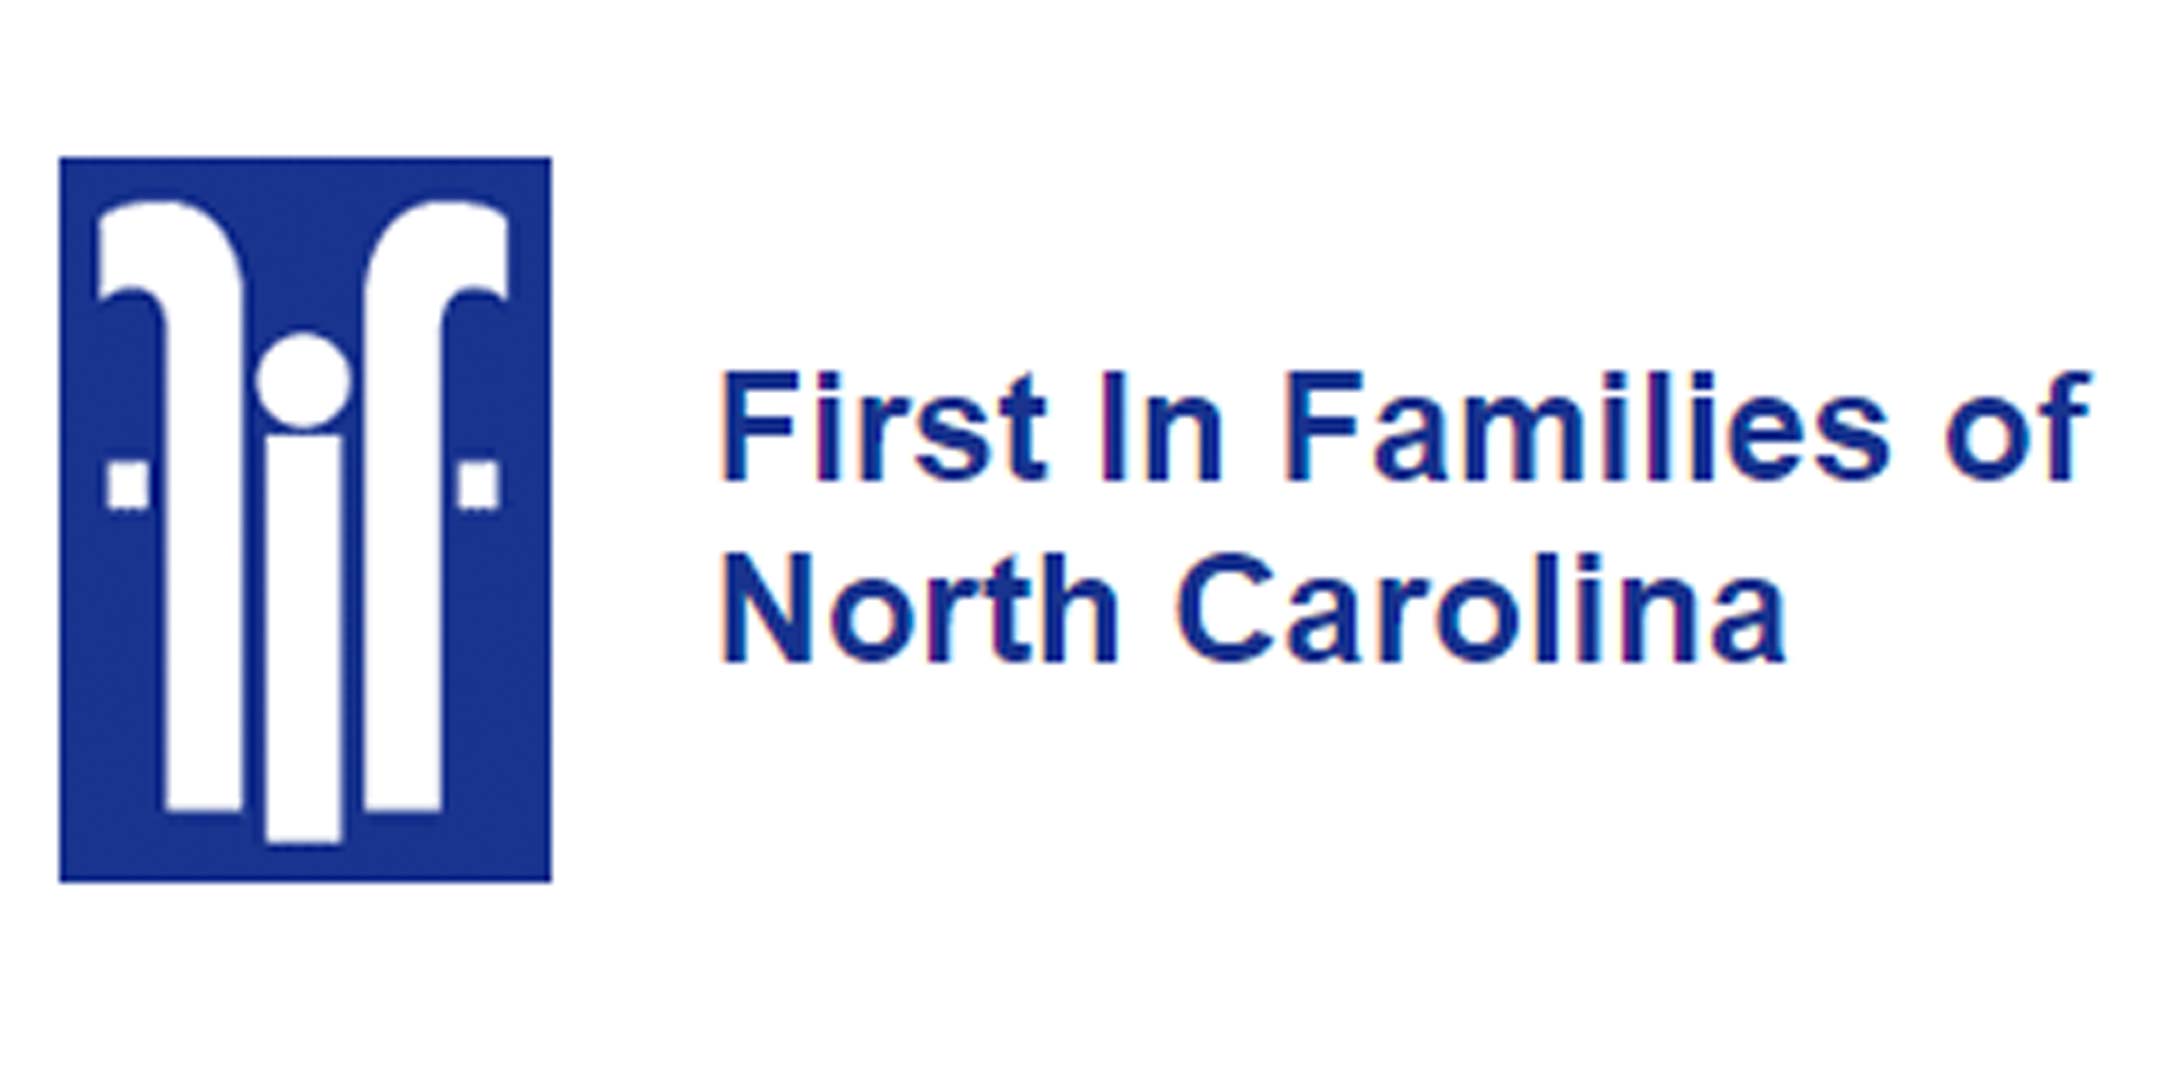 First in Families of North Carolina logo